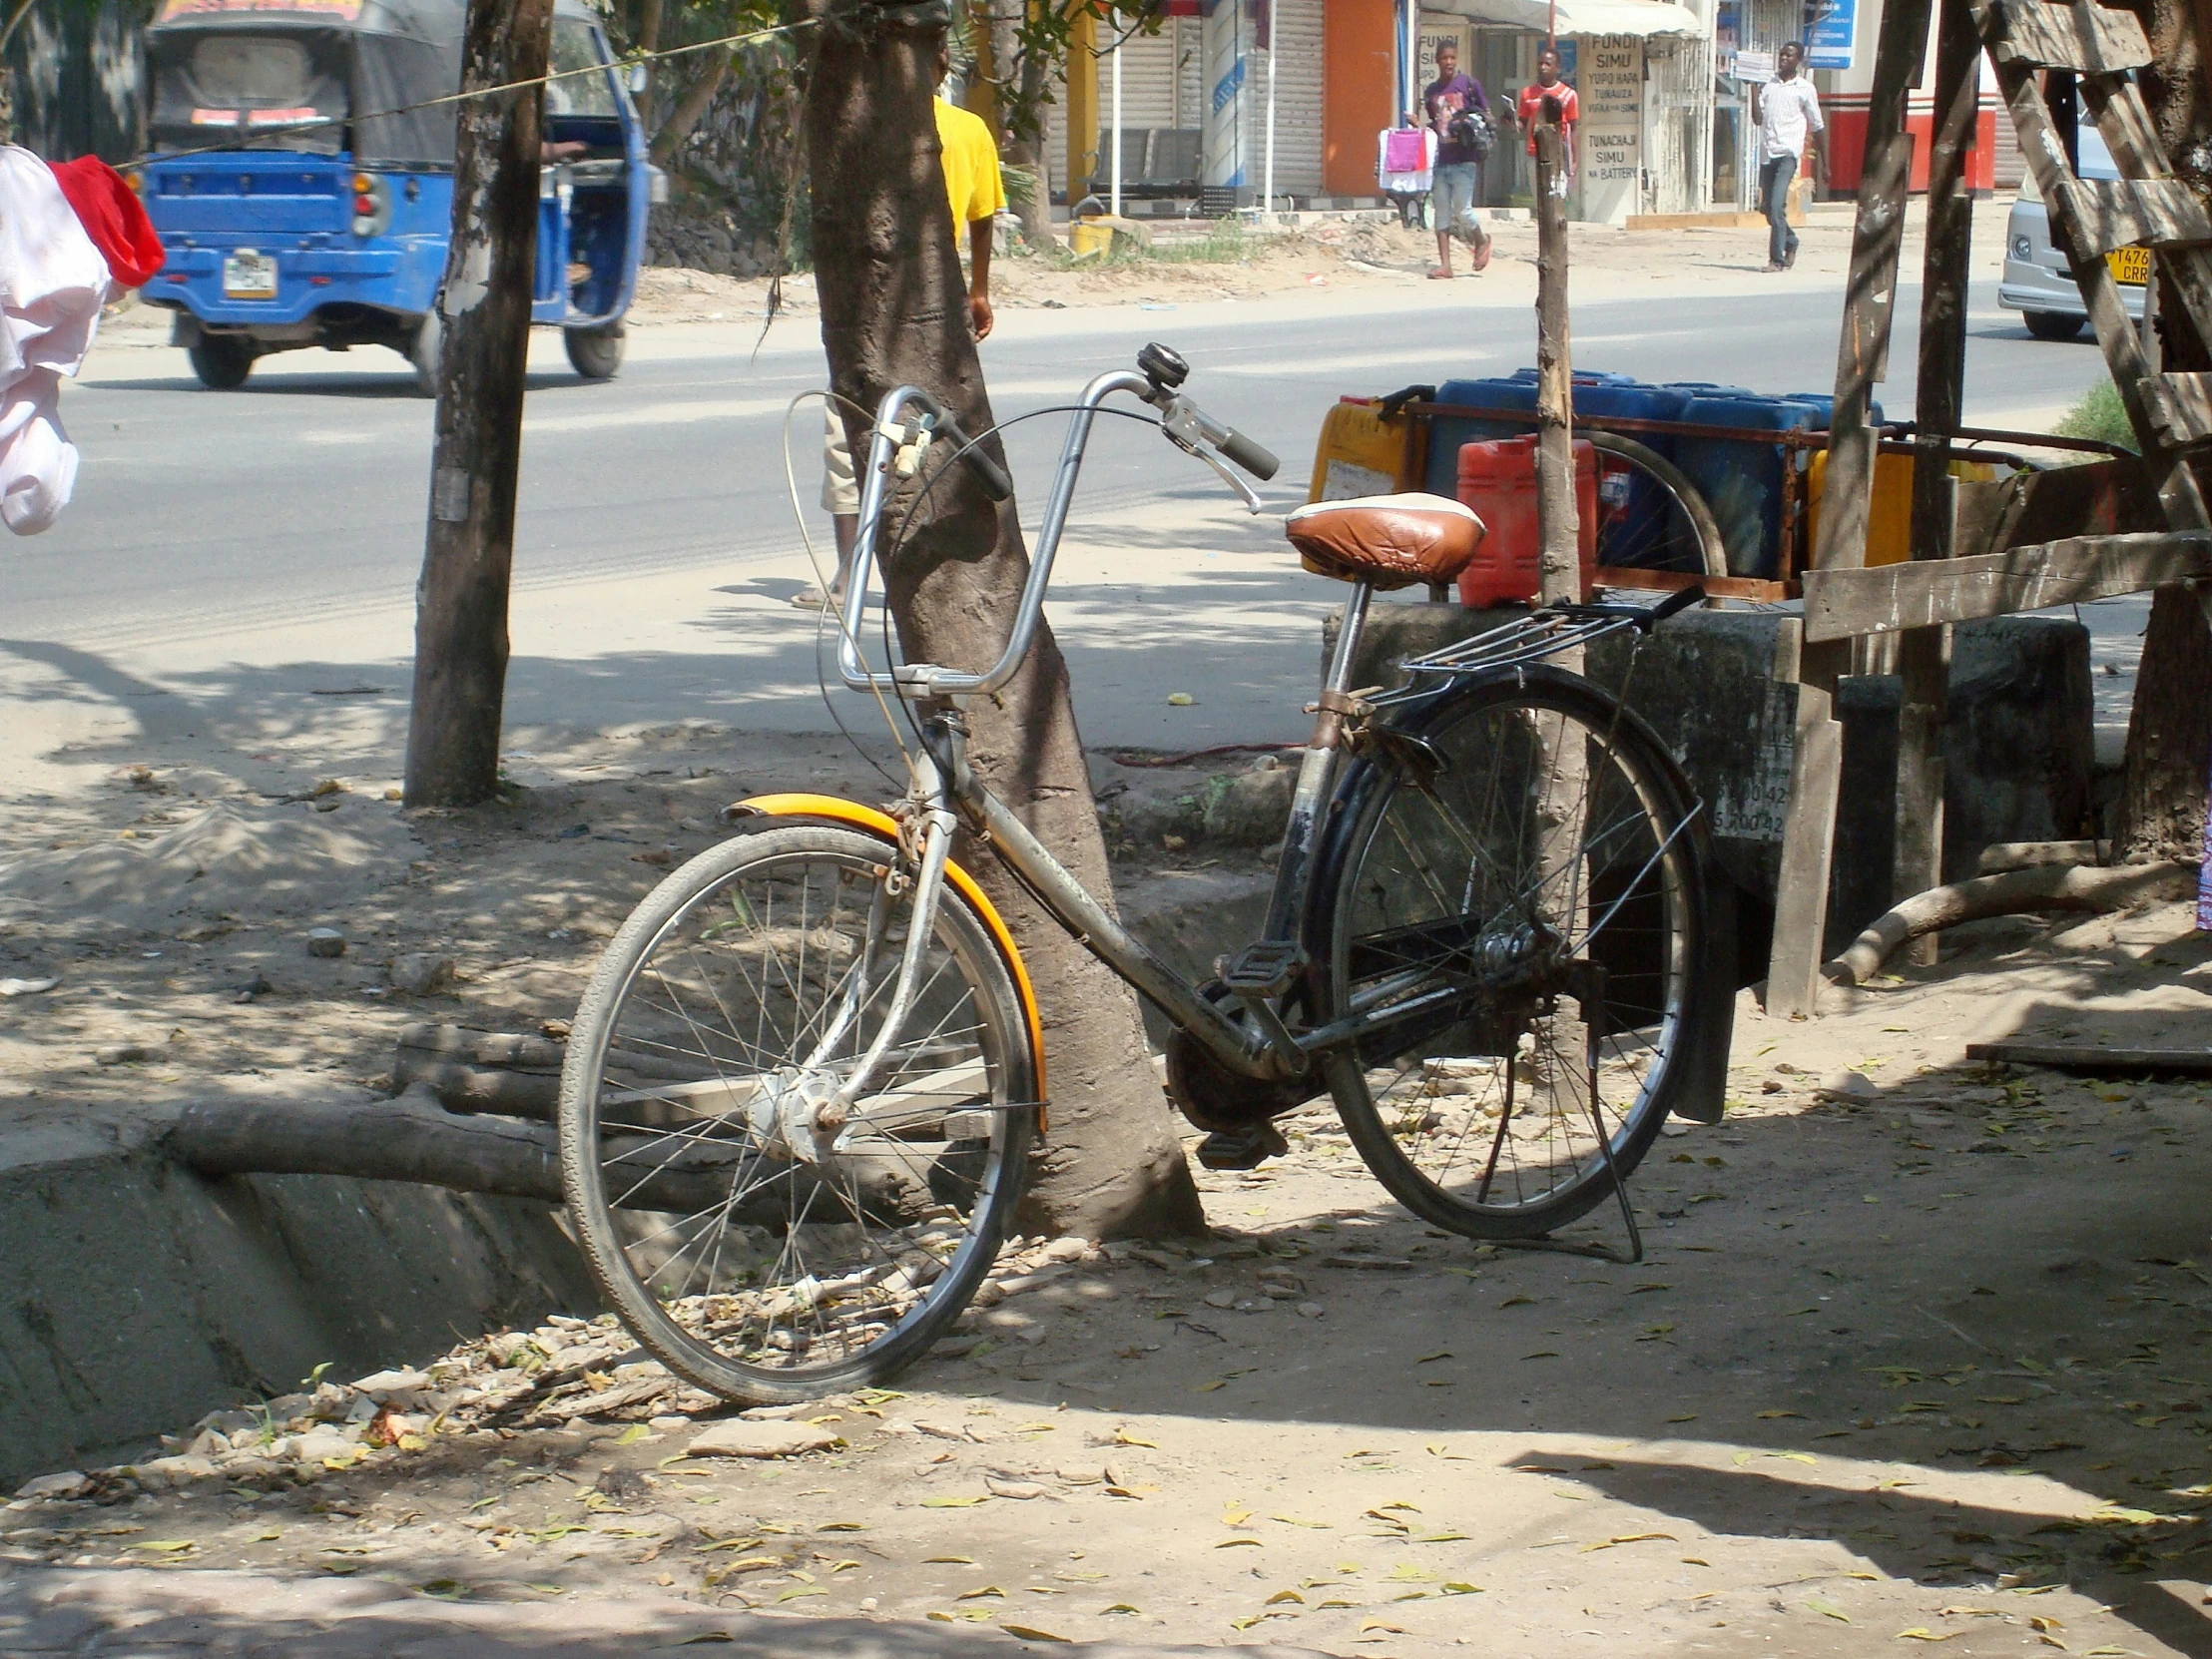 a bicycle is parked next to some tree and a basket